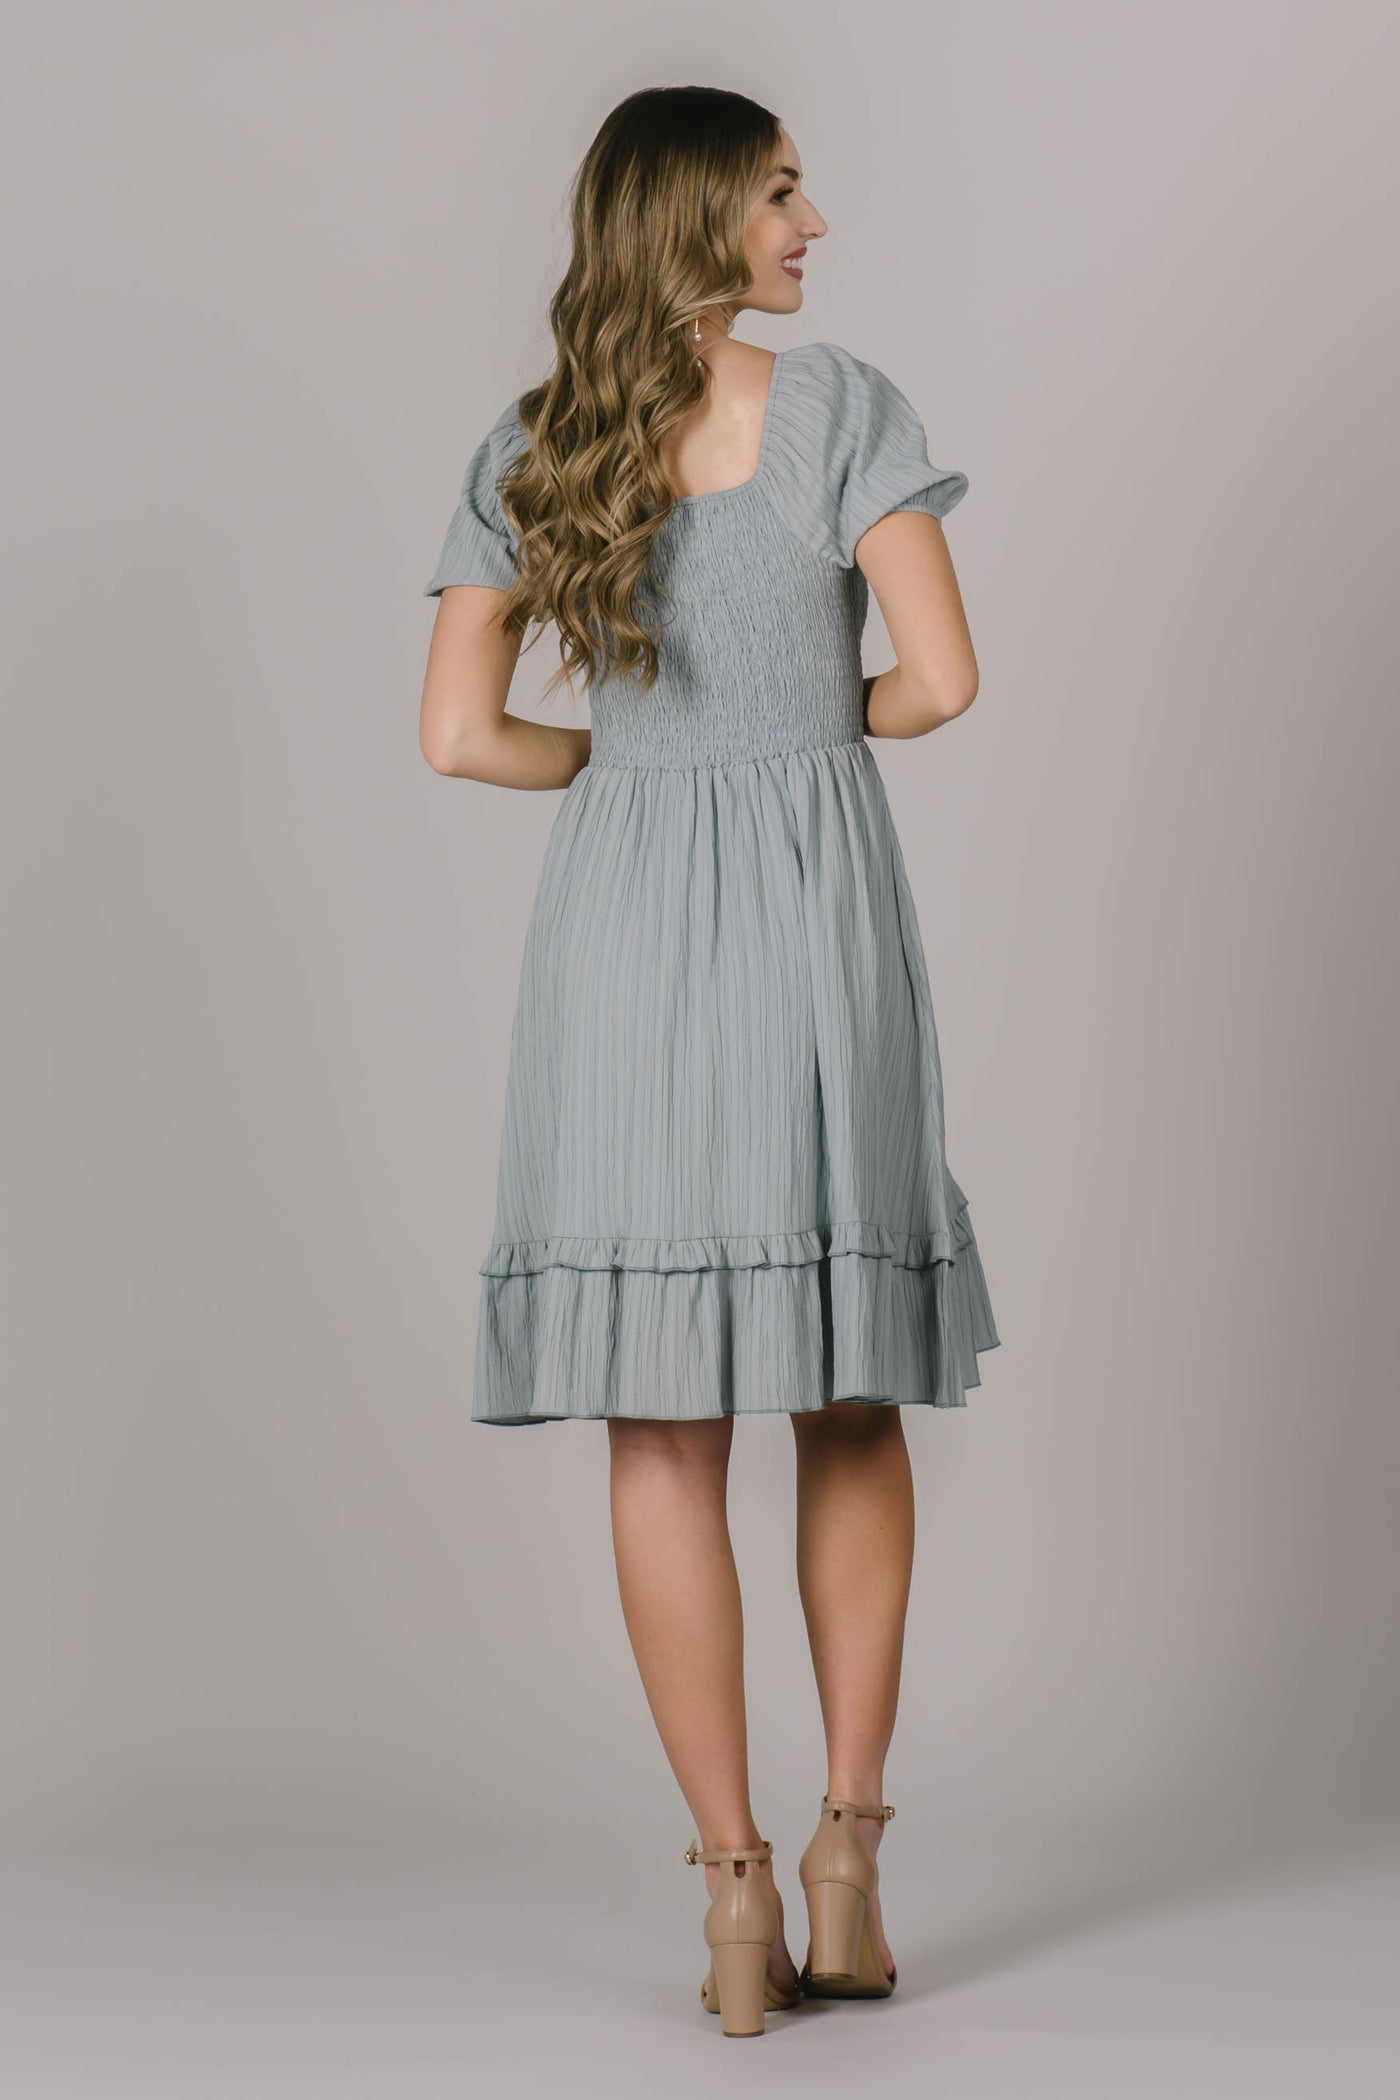 Back of modest dress in Utah with a soft square neckline, smocking across the back, and cute textured fabric throughout.